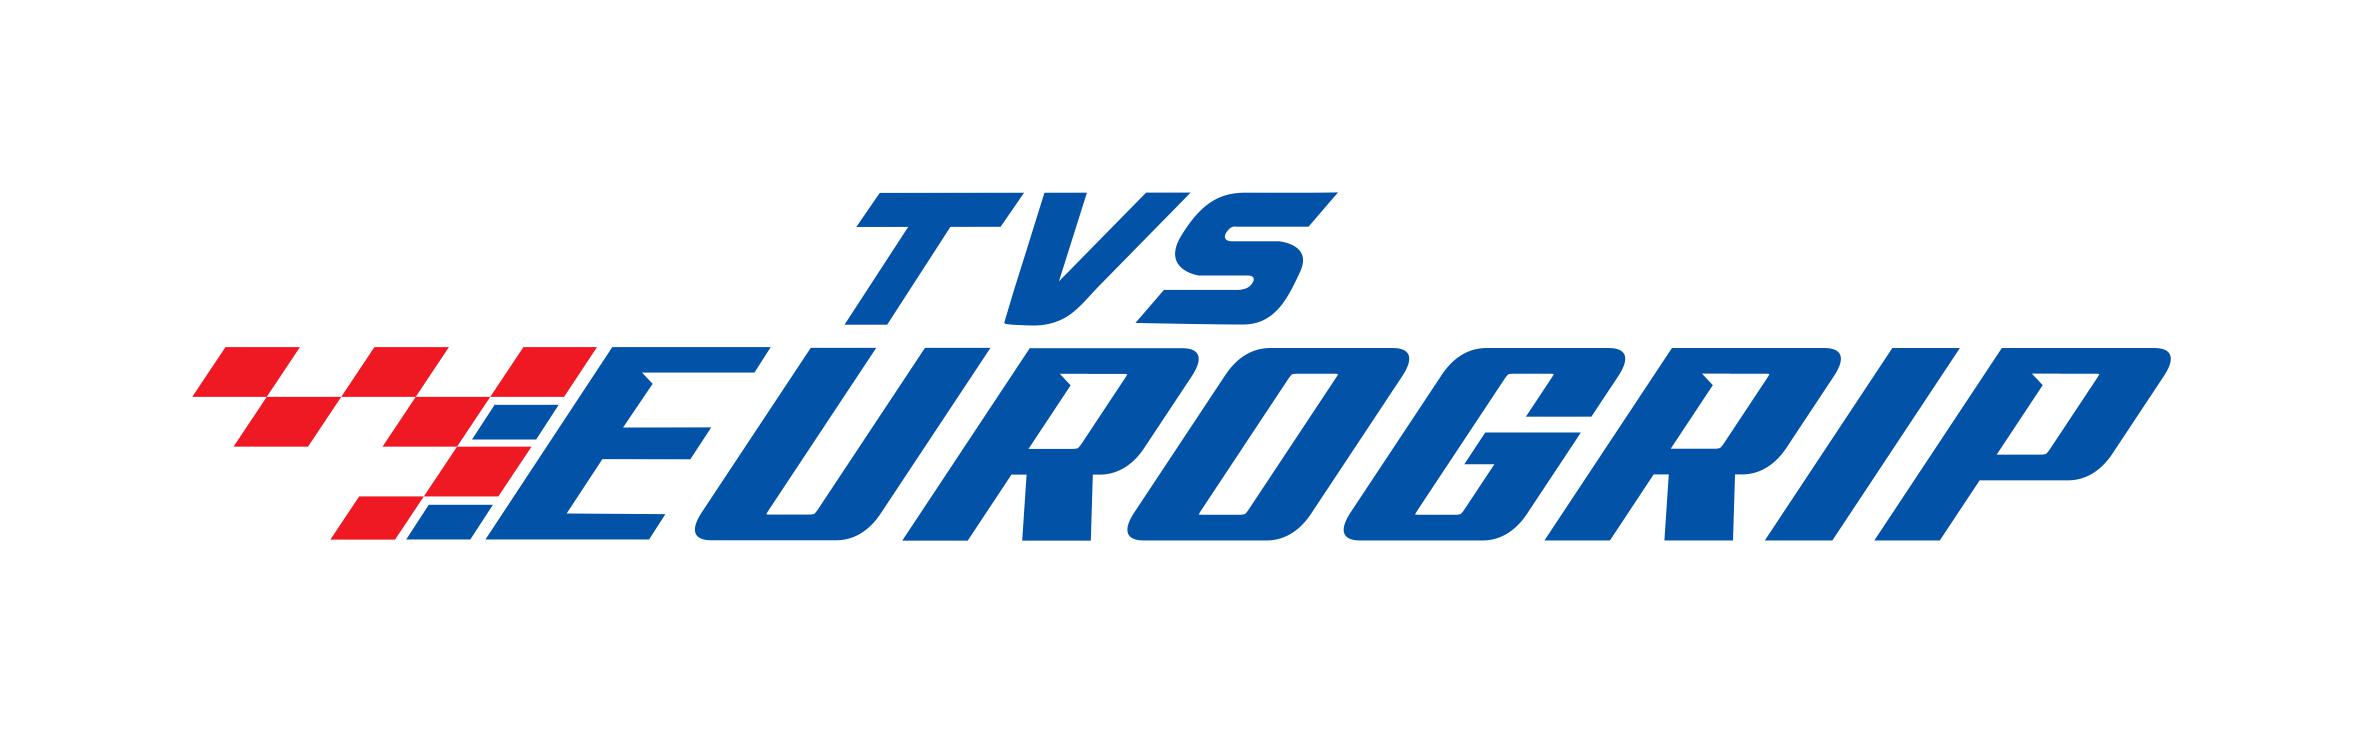 TVS EUROGRIP announces Group Personal Accident Insurance for its Distributor Sales Representatives decoding=